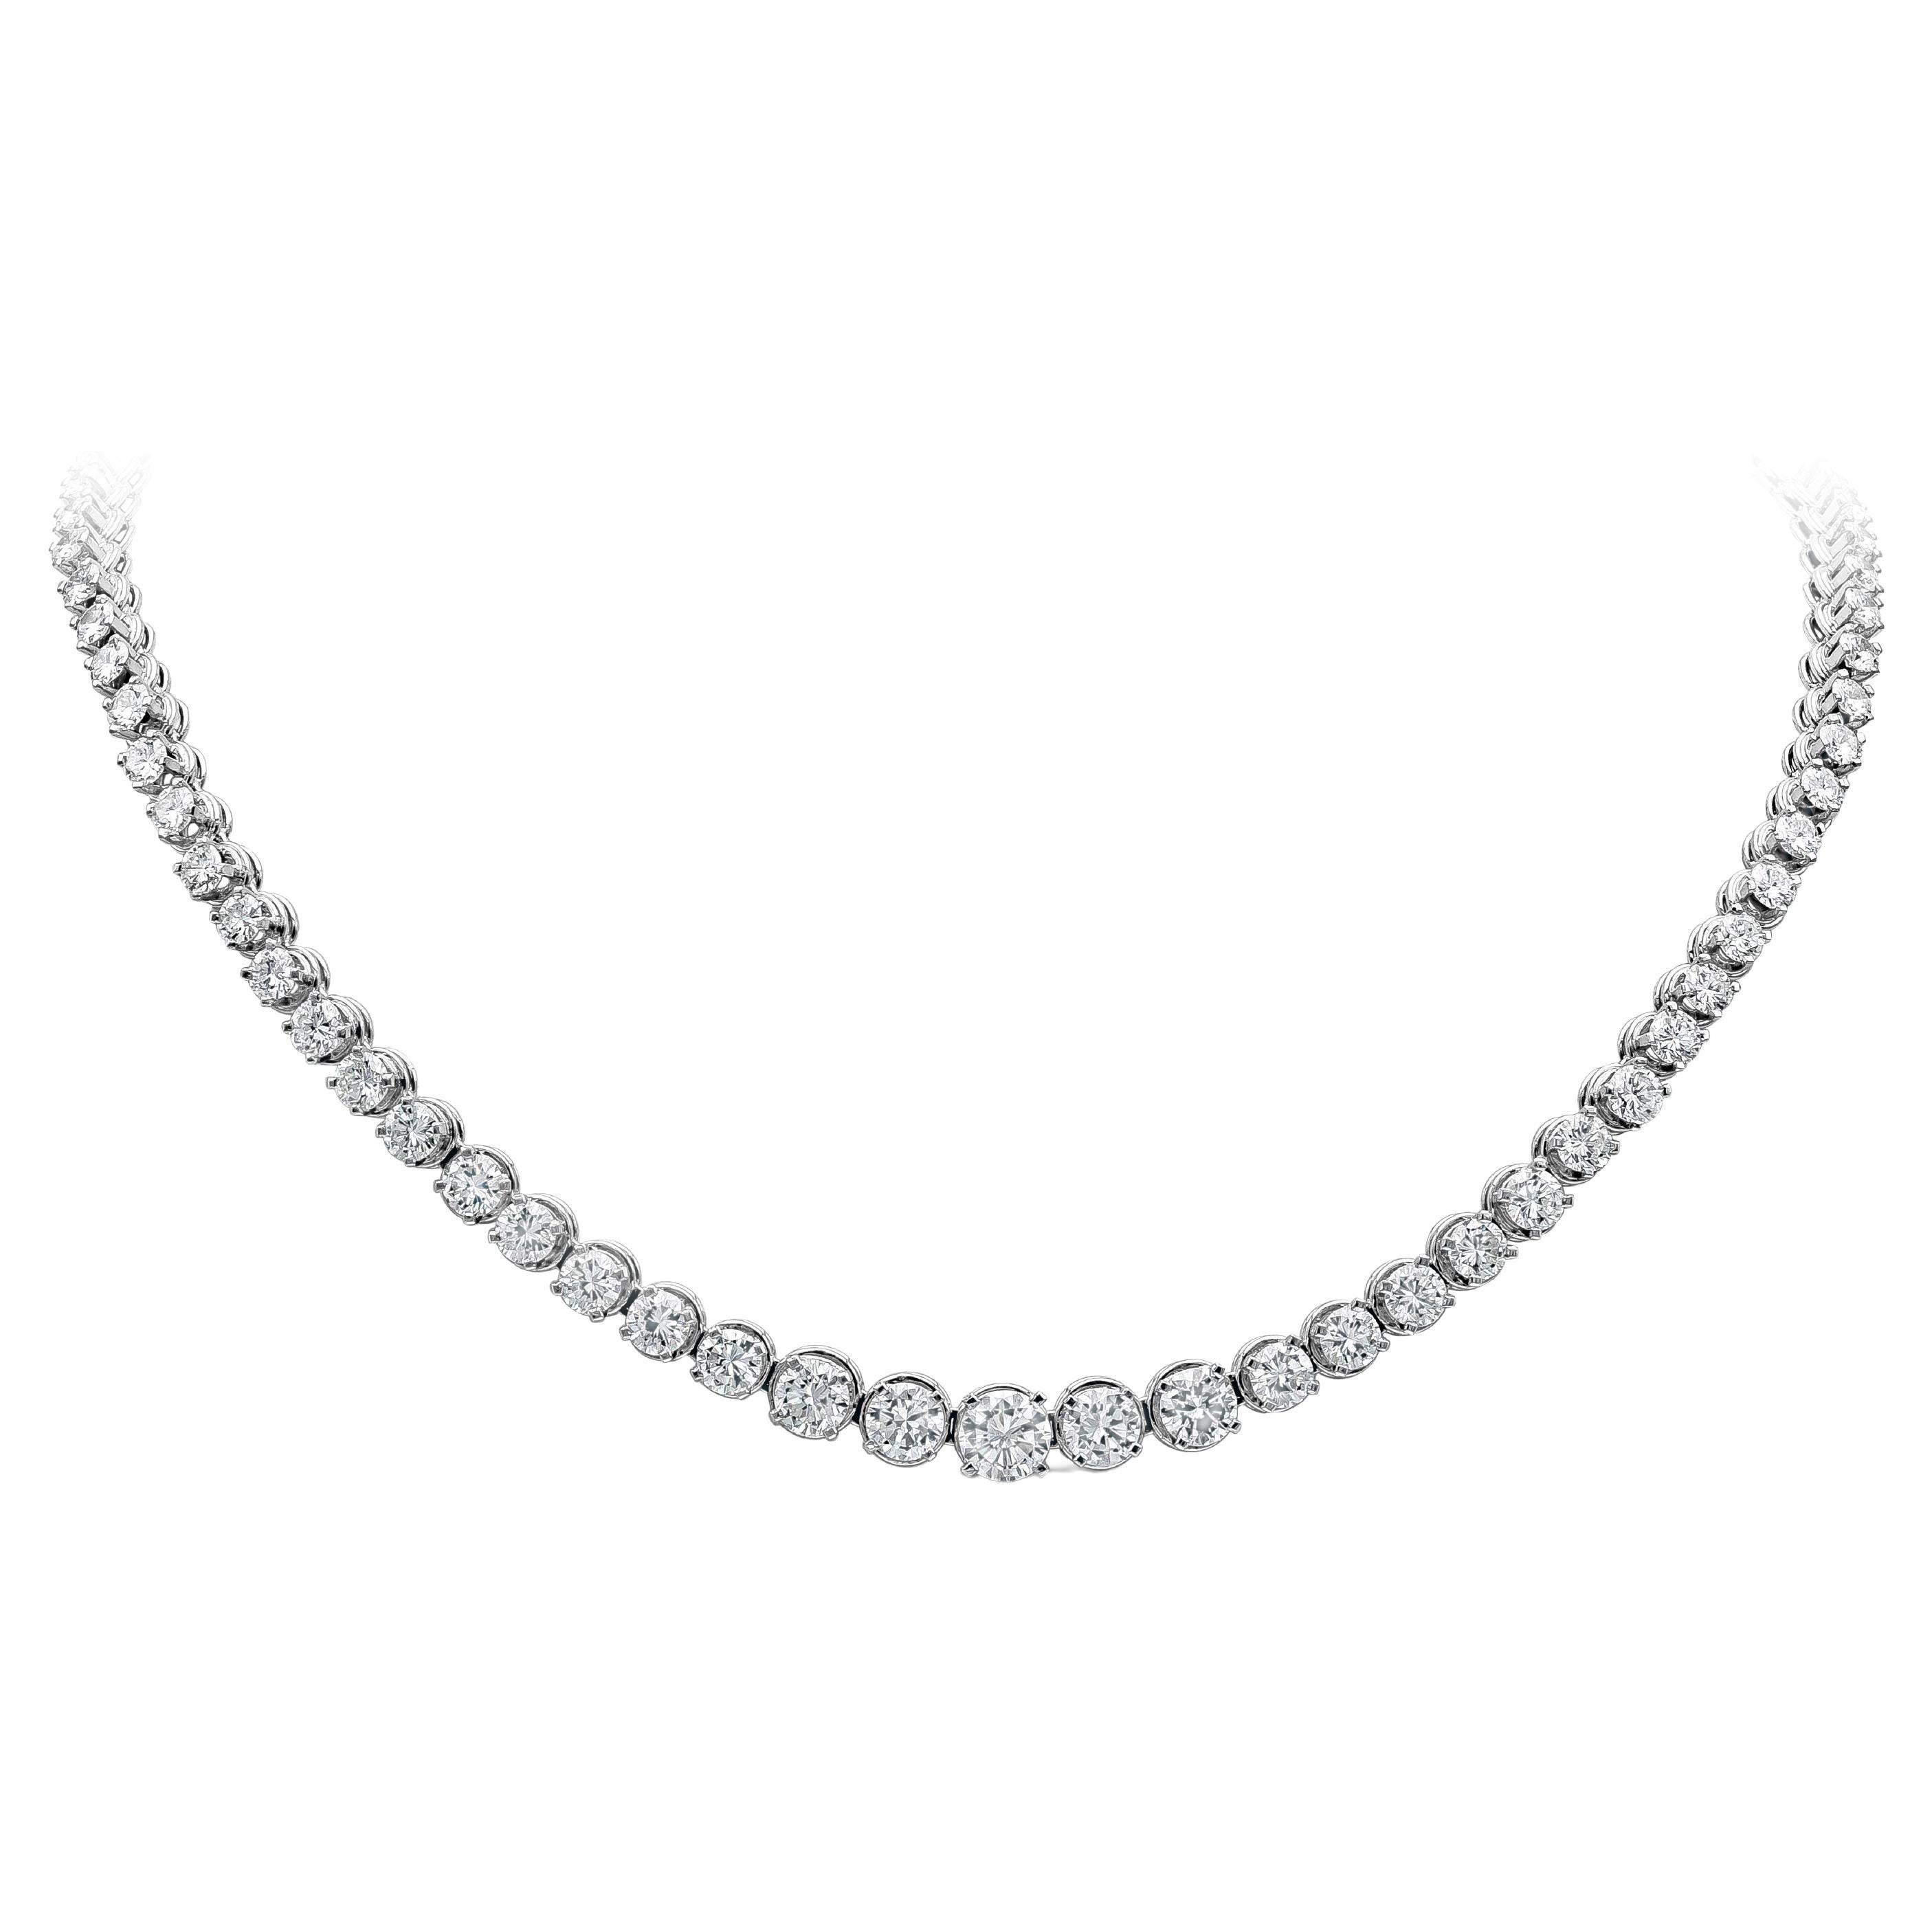 Roman Malakov 16.10 Carats Total Round Diamond Tennis Necklace in Platinum For Sale